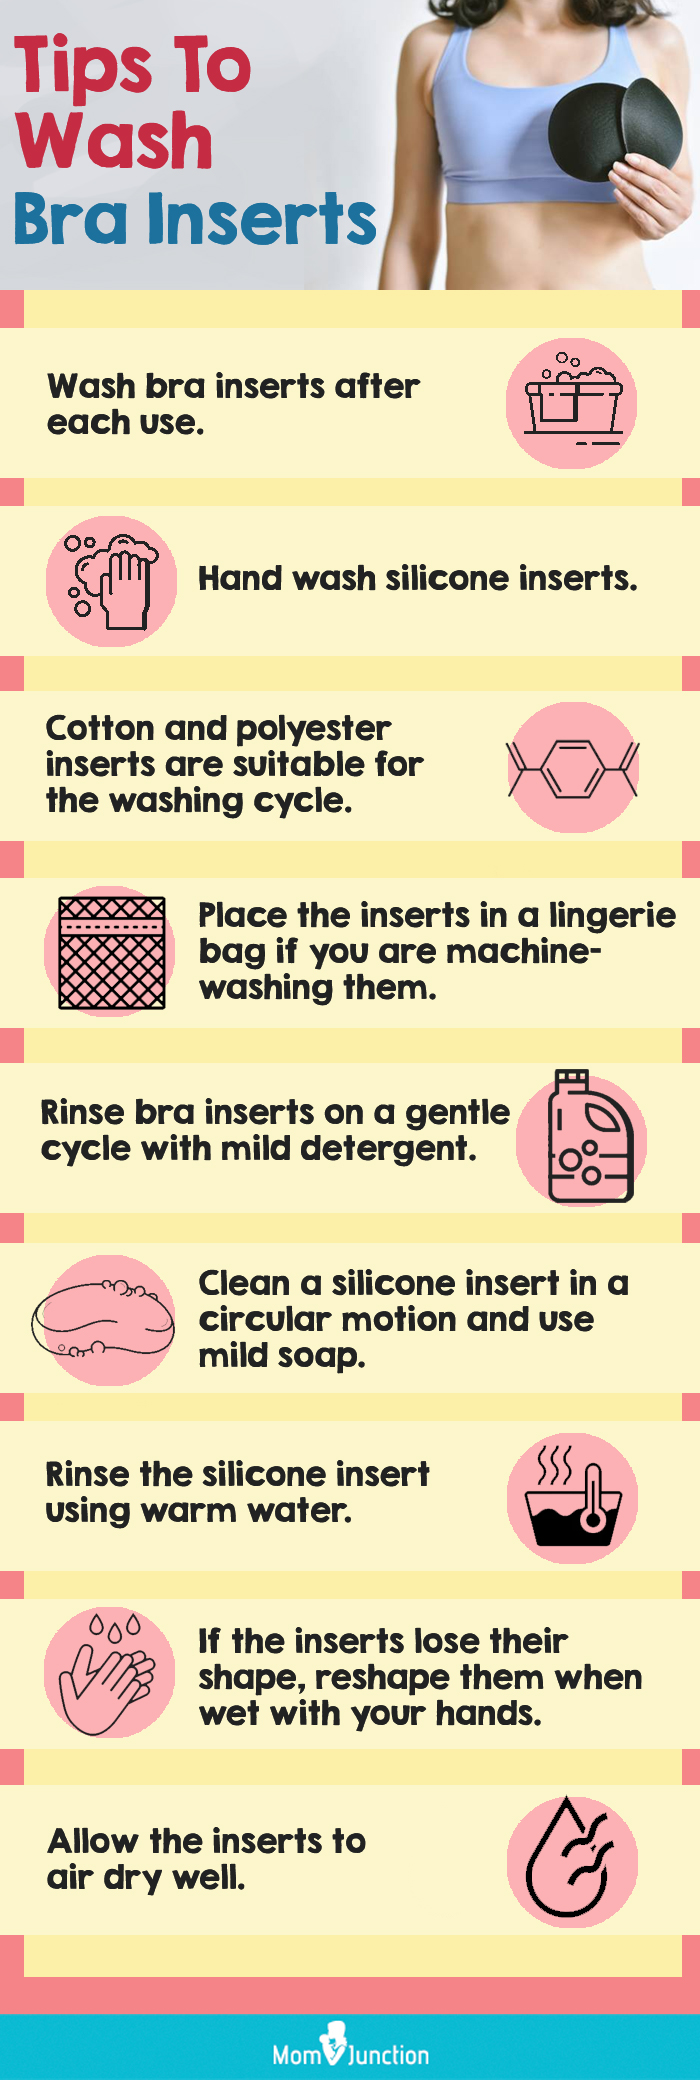 Tips To Wash Bra Inserts (Infographic)